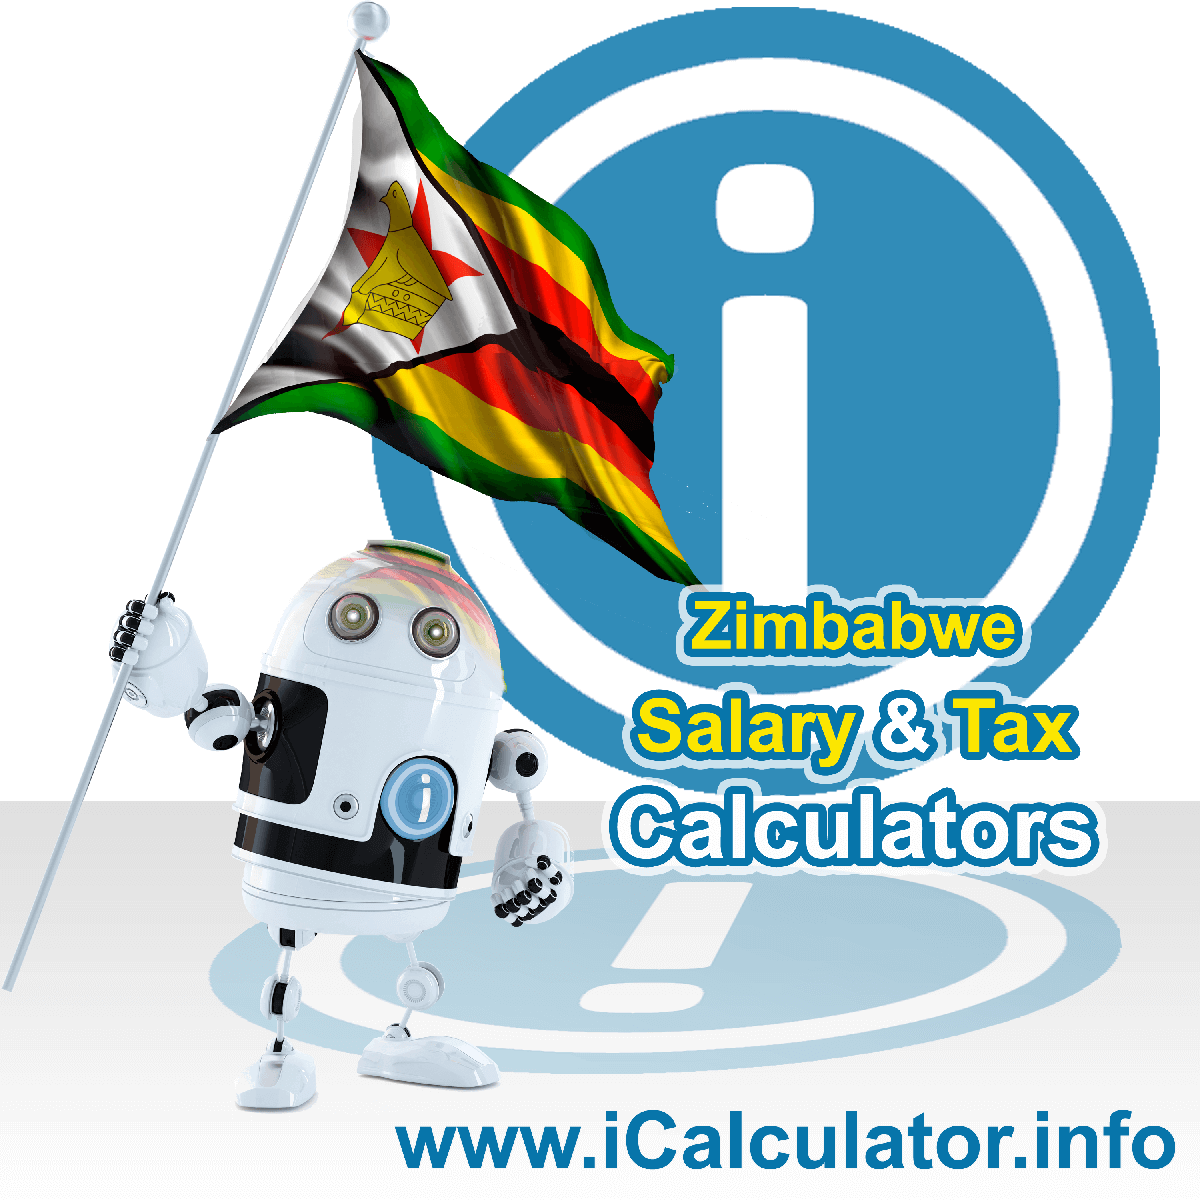 Zimbabwe Tax Calculator. This image shows the Zimbabwe flag and information relating to the tax formula for the Zimbabwe Salary Calculator